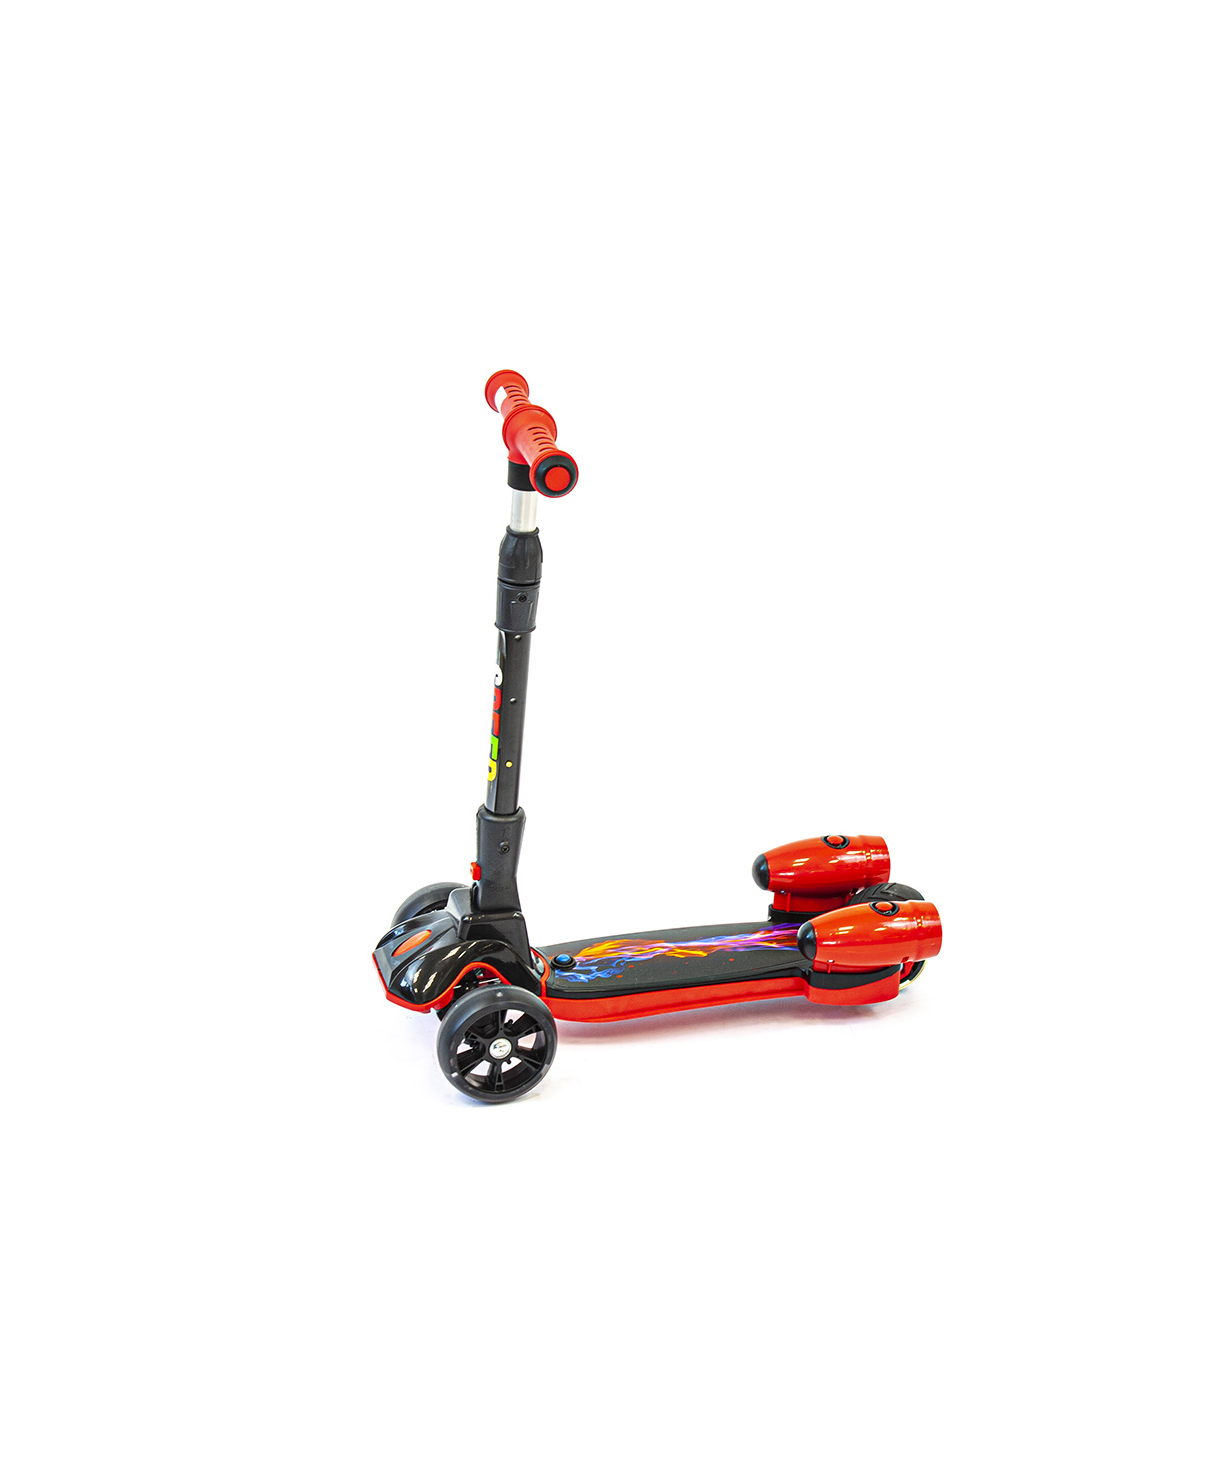 Scooter YK-828A